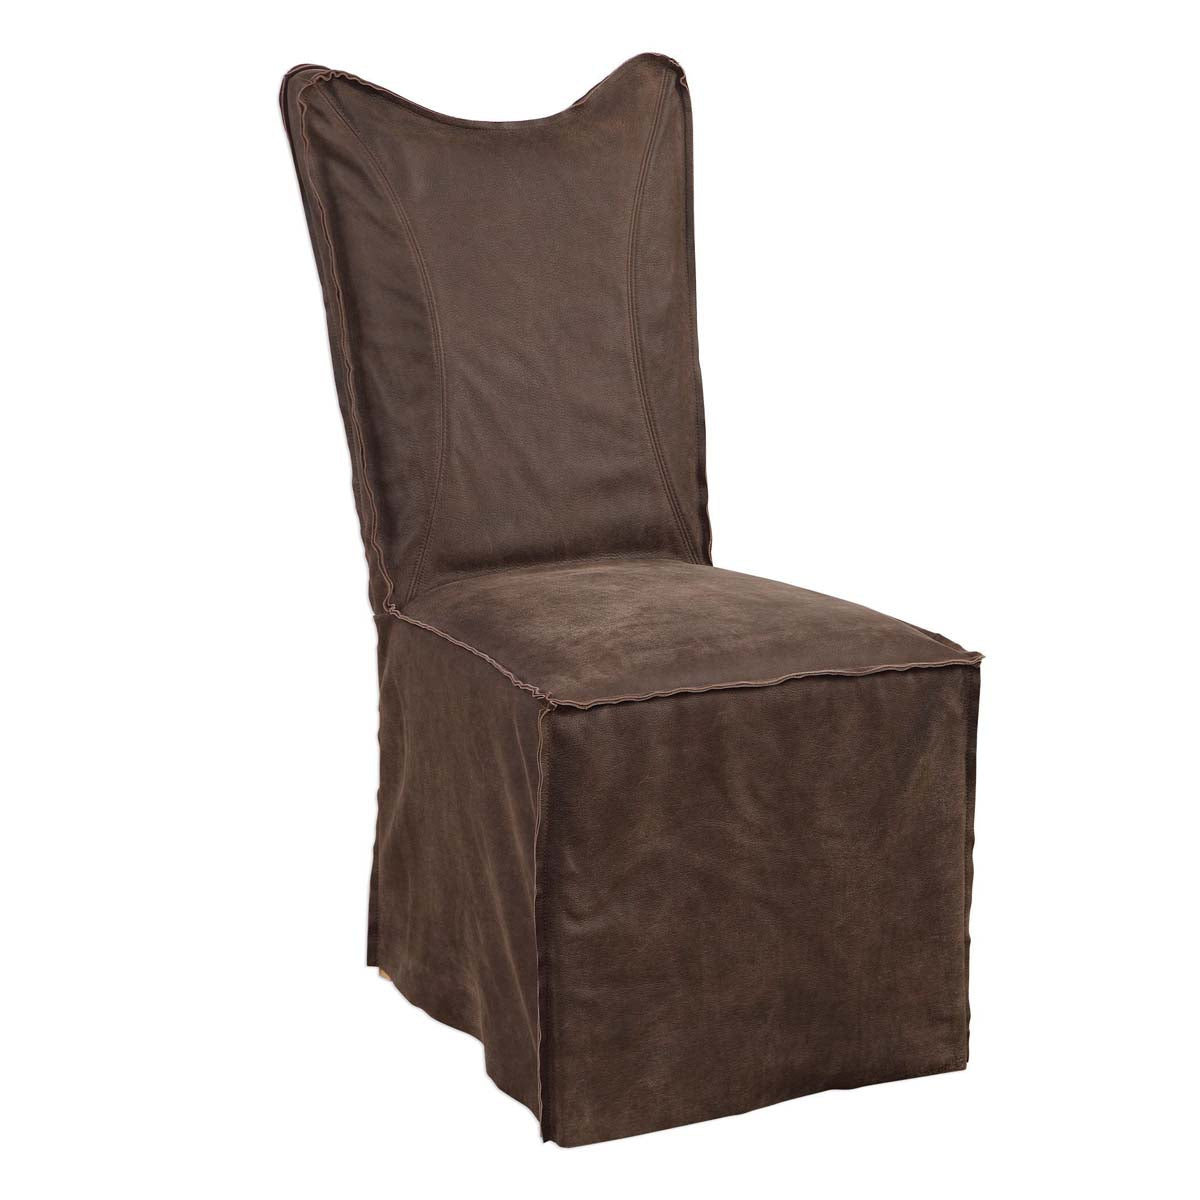 Uttermost Delroy Armless Chairs, Chocolate, Set Of 2